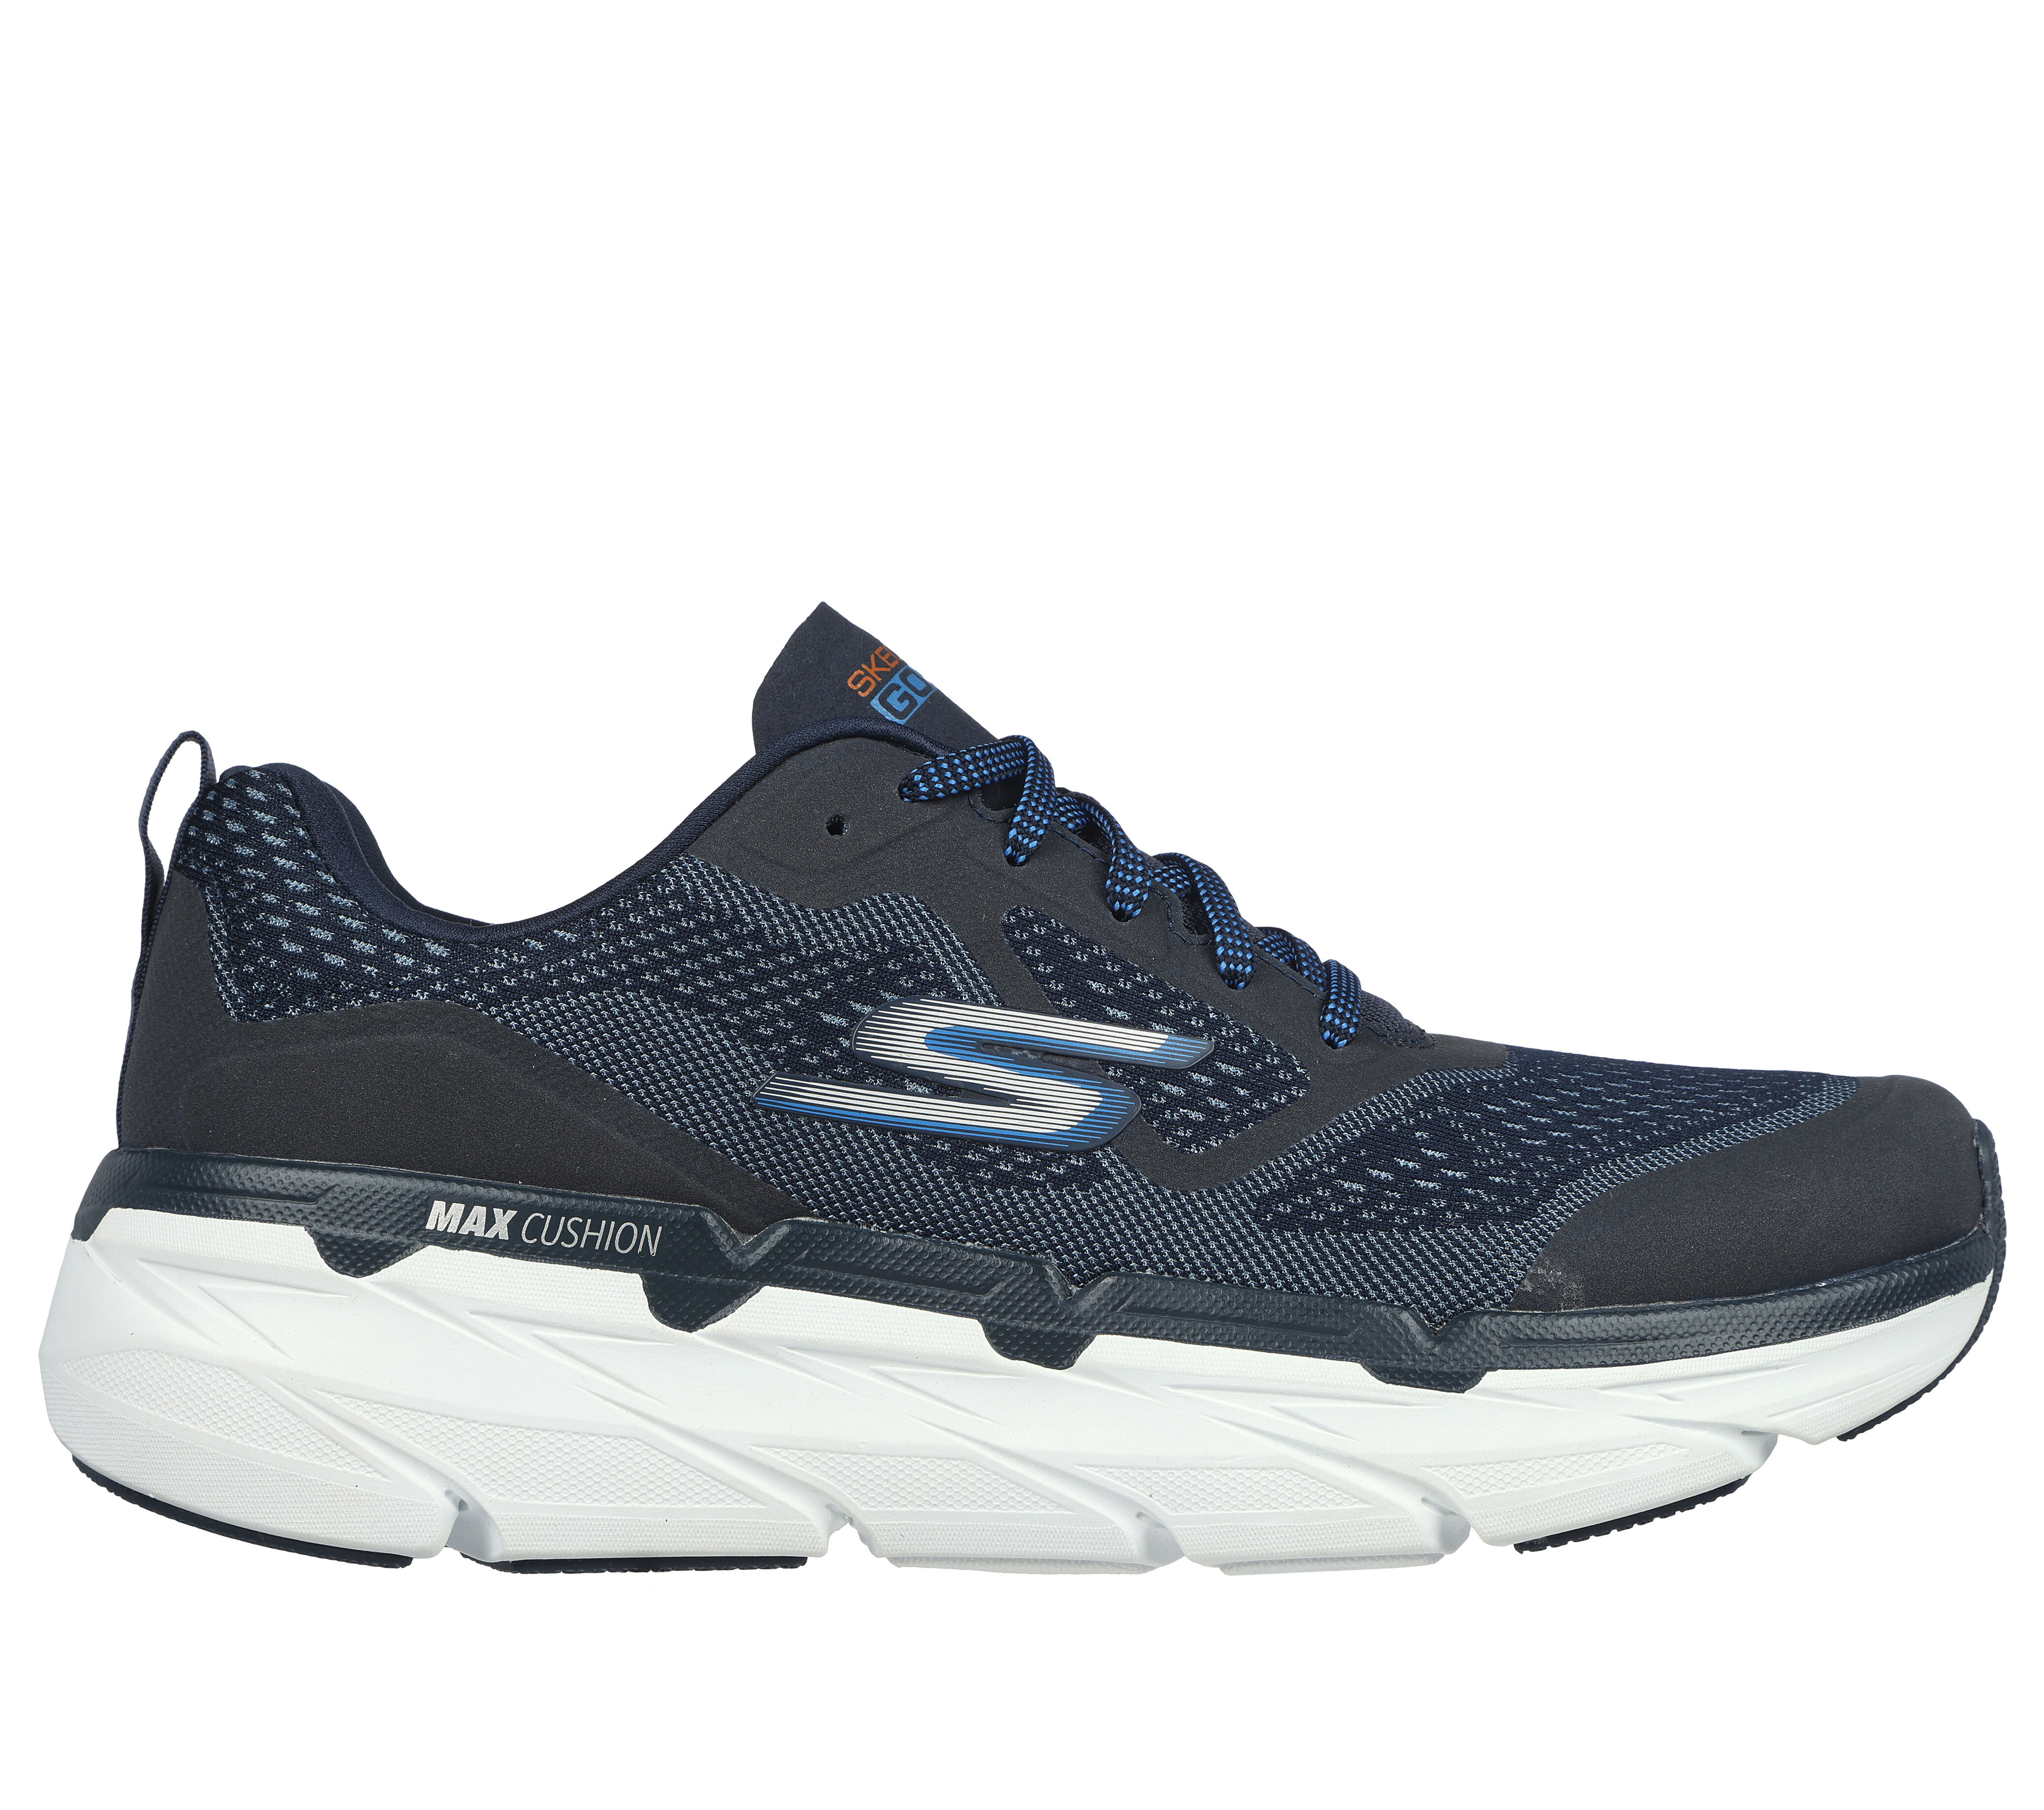 skechers south park mall